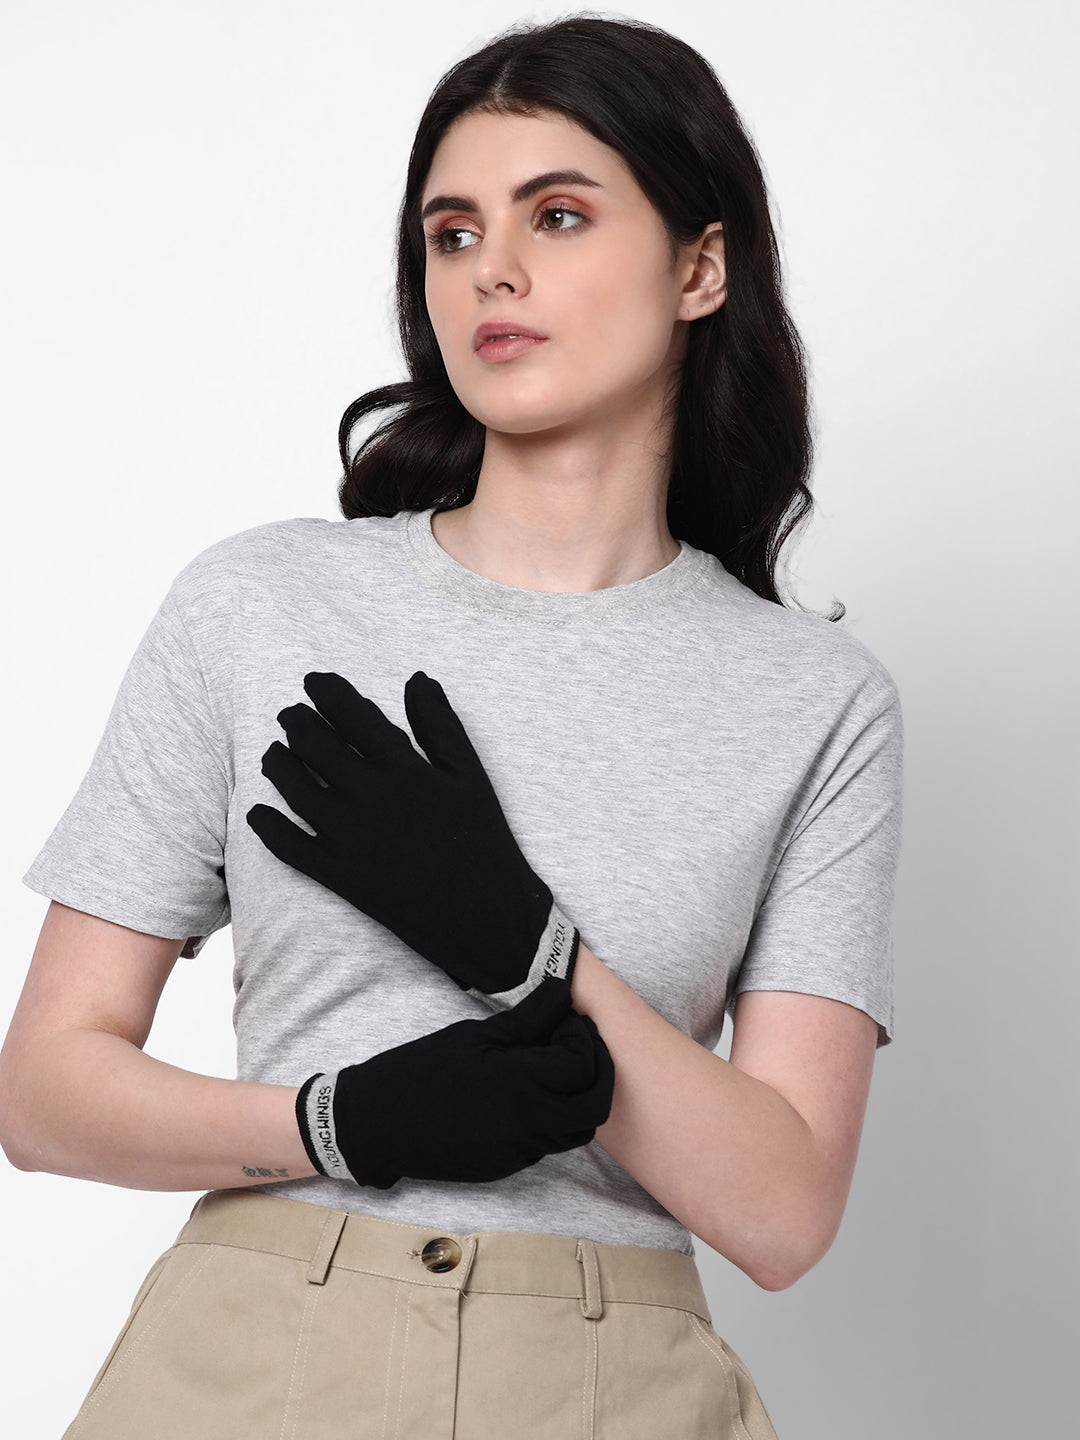 Women's Antibacterial Cotton  Hand Gloves - Pack of 2 Pairs